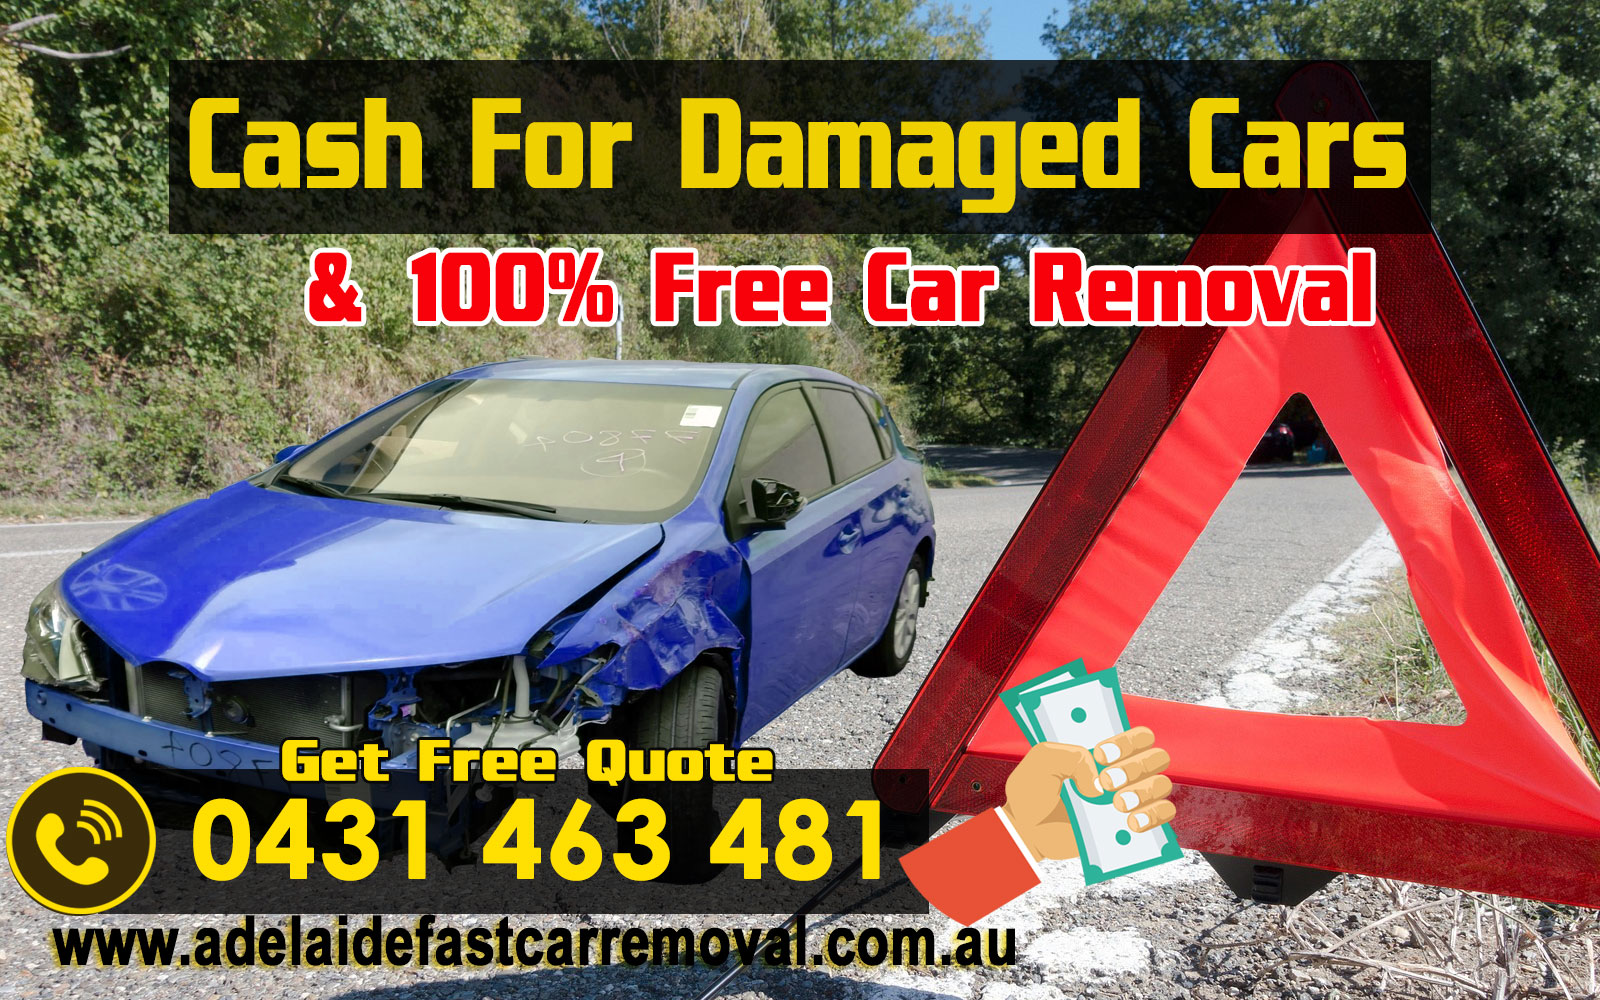 How To Win Friends And Influence People with CAR REMOVAL ADELAIDE